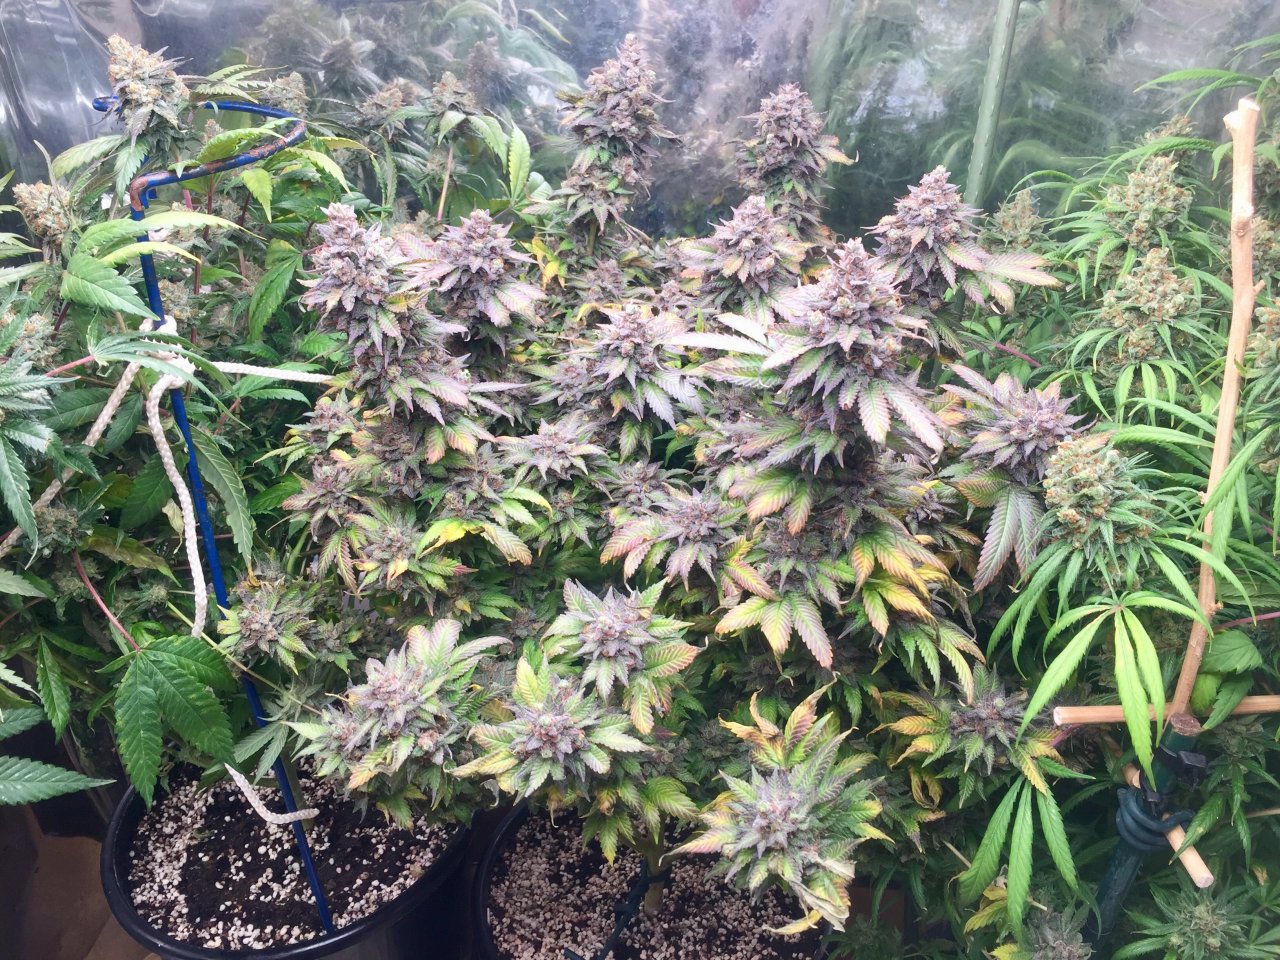 Bubba’s Sis, day 83